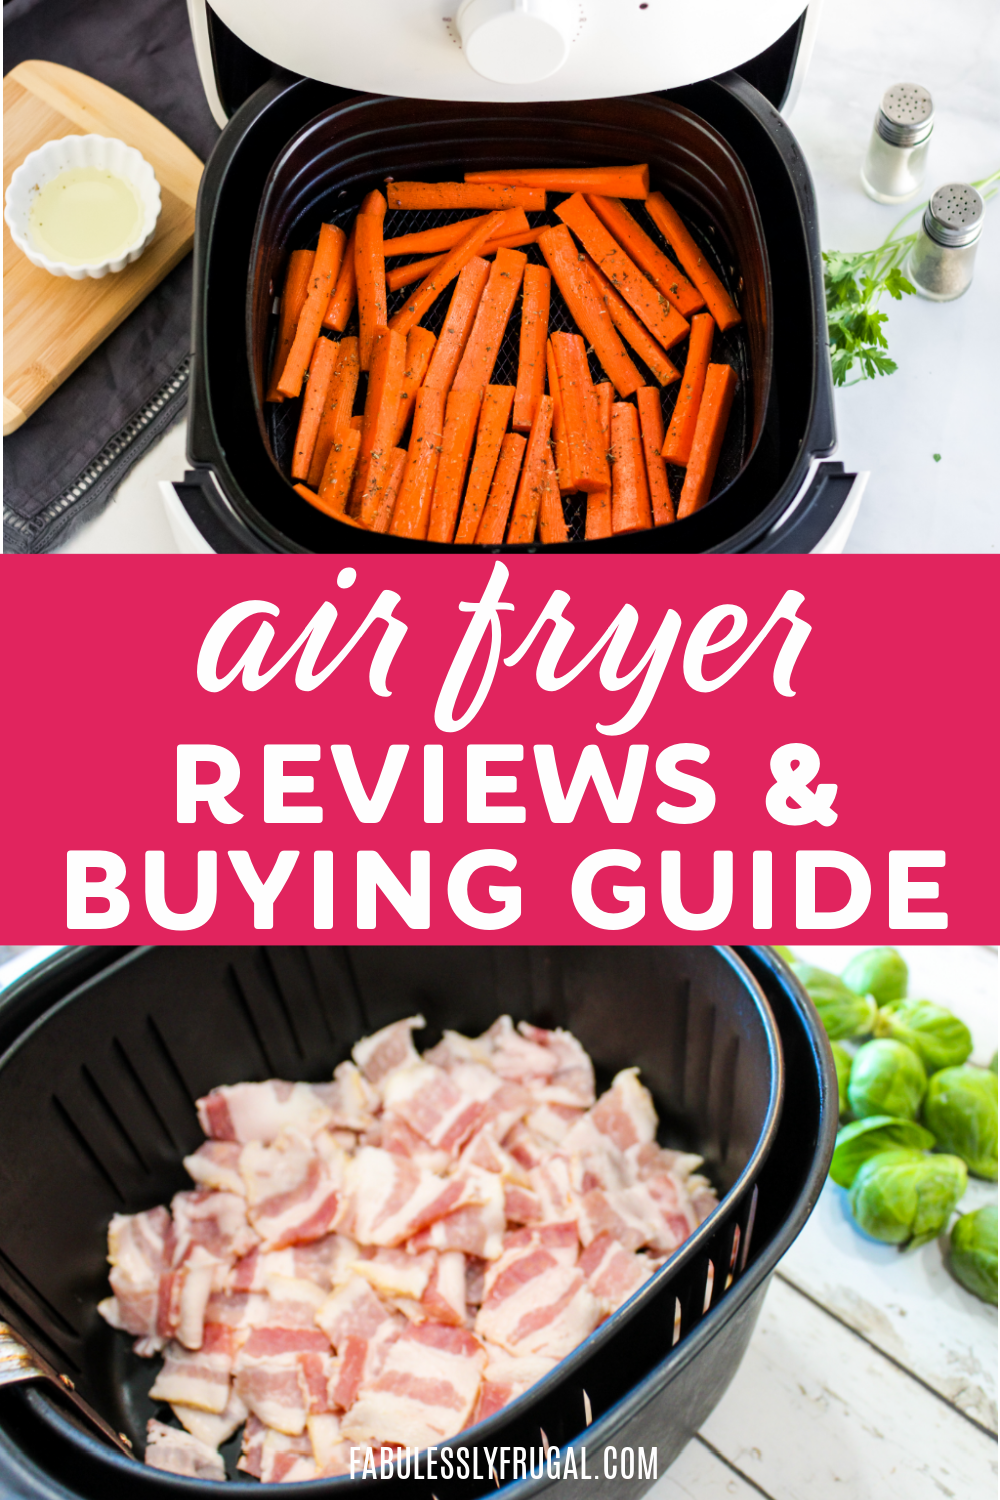 https://fabulesslyfrugal.com/wp-content/uploads/2022/11/air-fryer-reviews-and-buying-guides-Pinterest-Pin-3.png